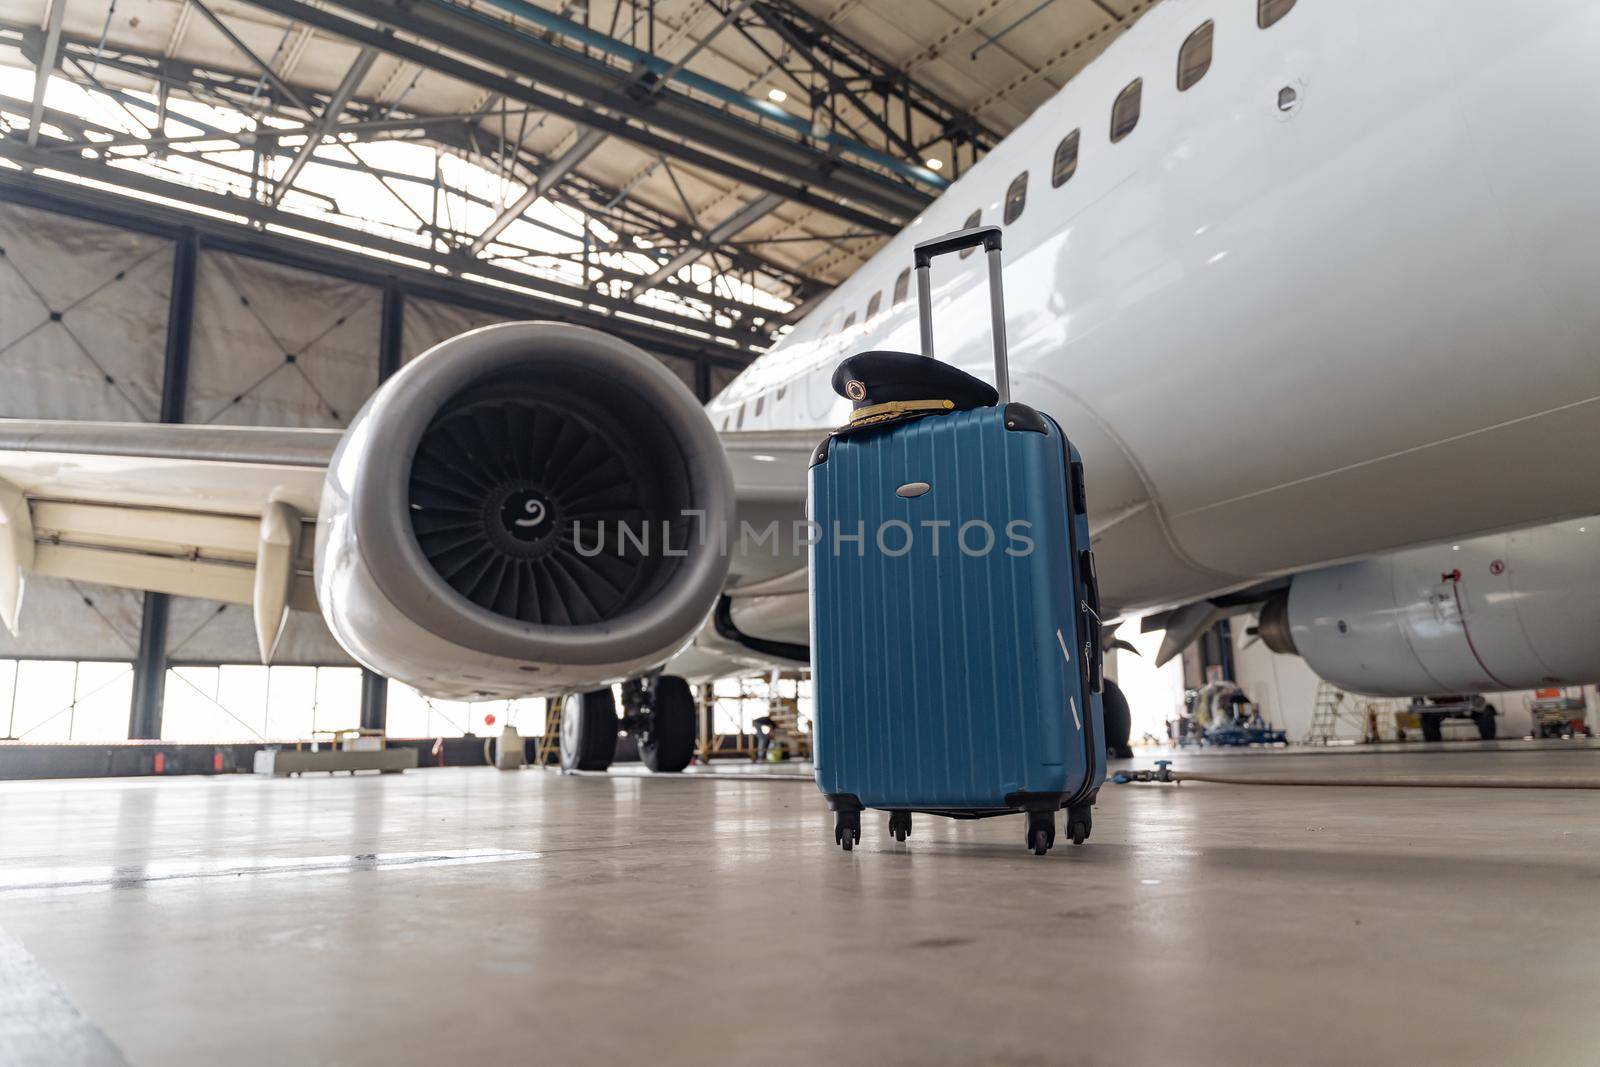 Blue suitcase in a hangar with a pilot's cap on it against the backdrop of a white plane